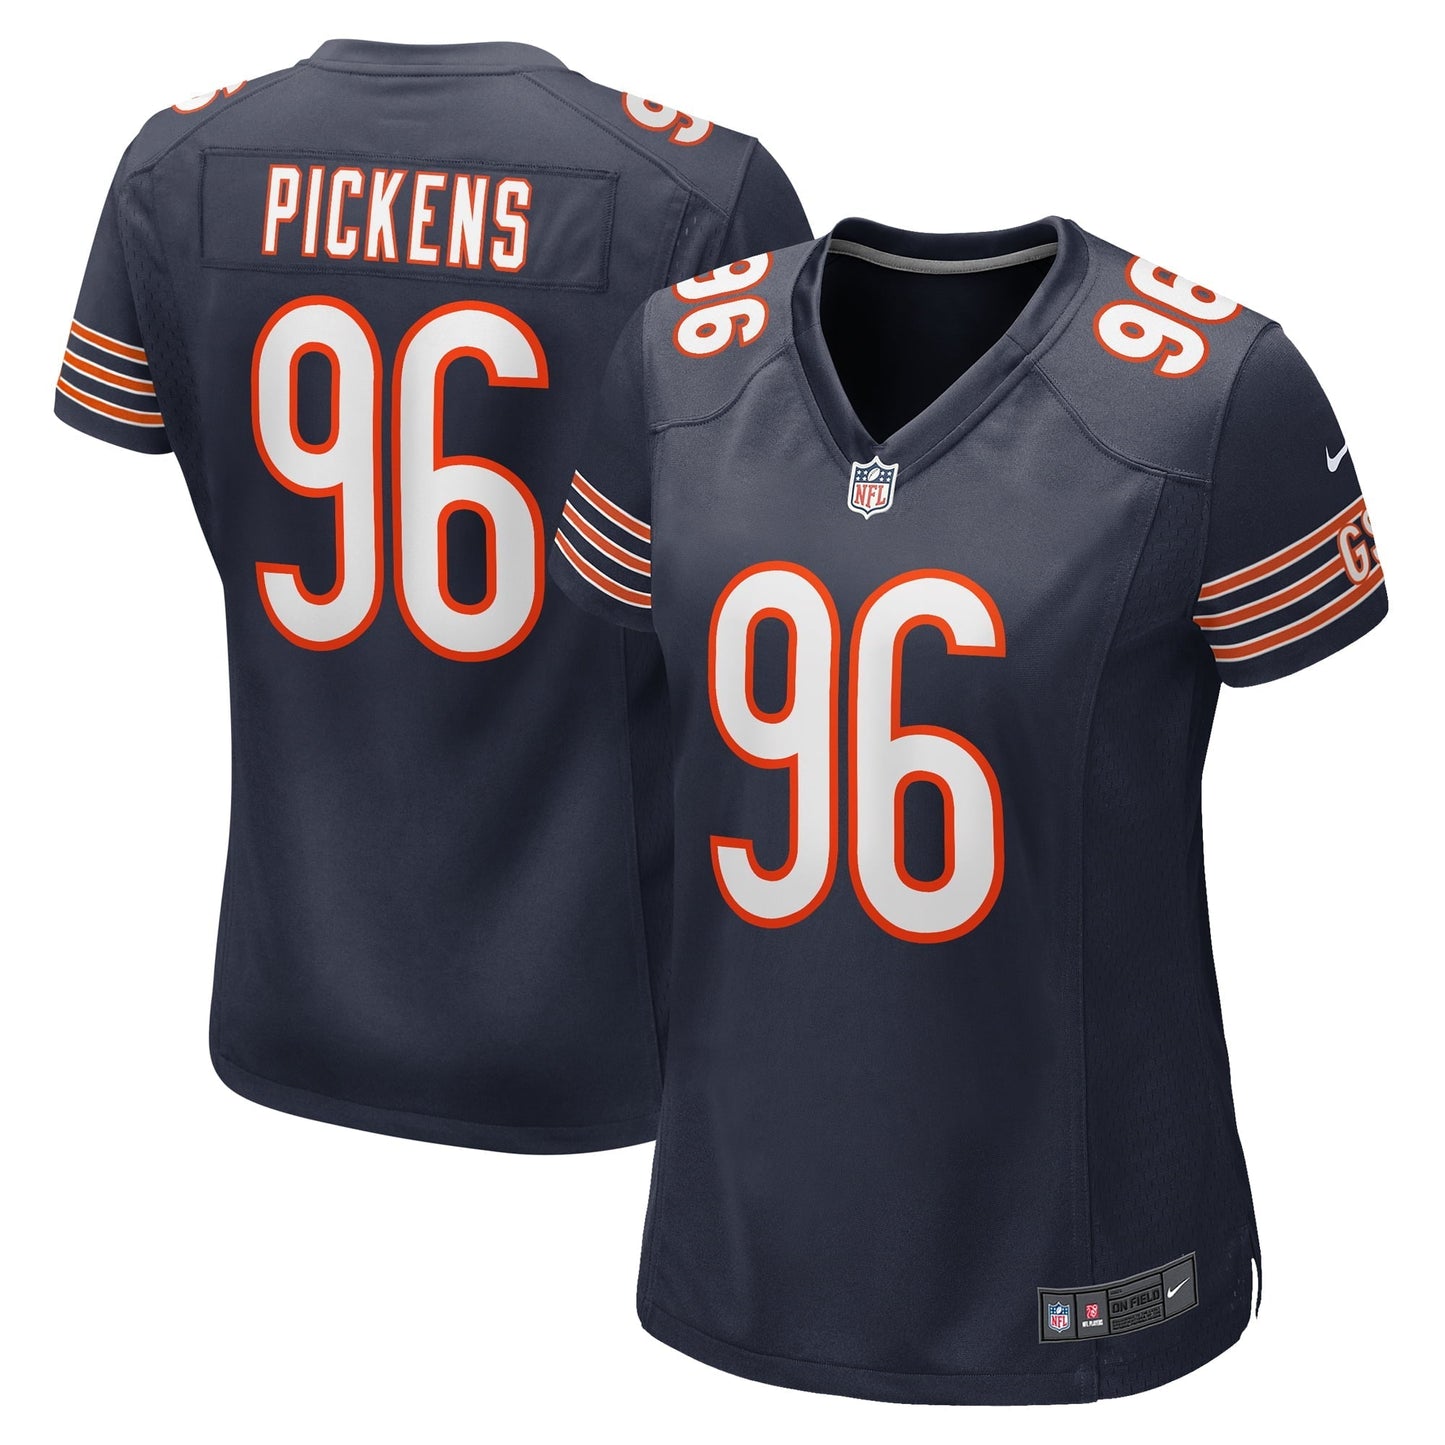 Women's Nike Zacch Pickens Navy Chicago Bears Team Game Jersey